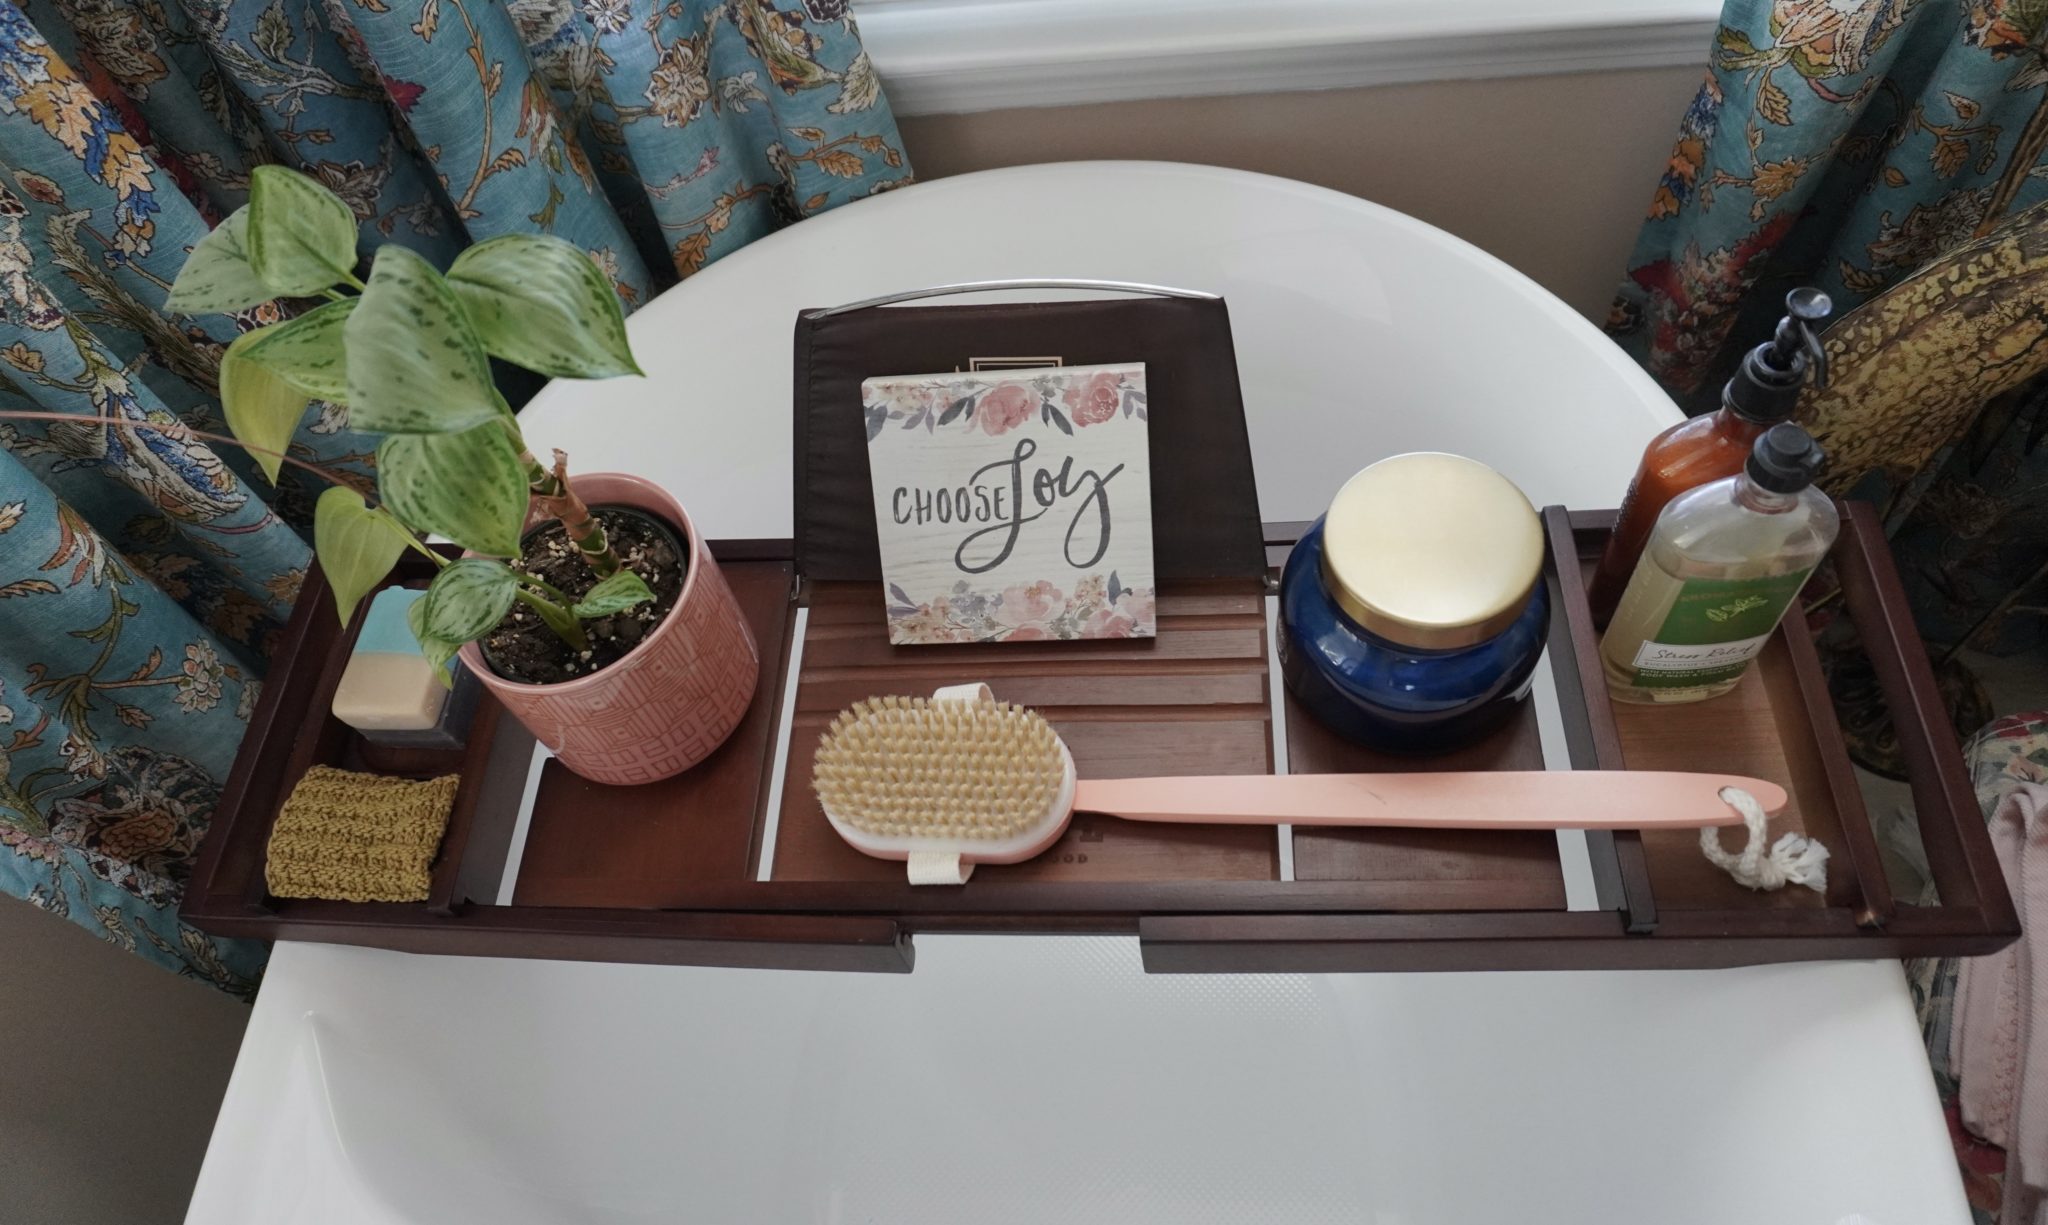 A wooden bath tray over a white soaking tub with a plant and candle on top.